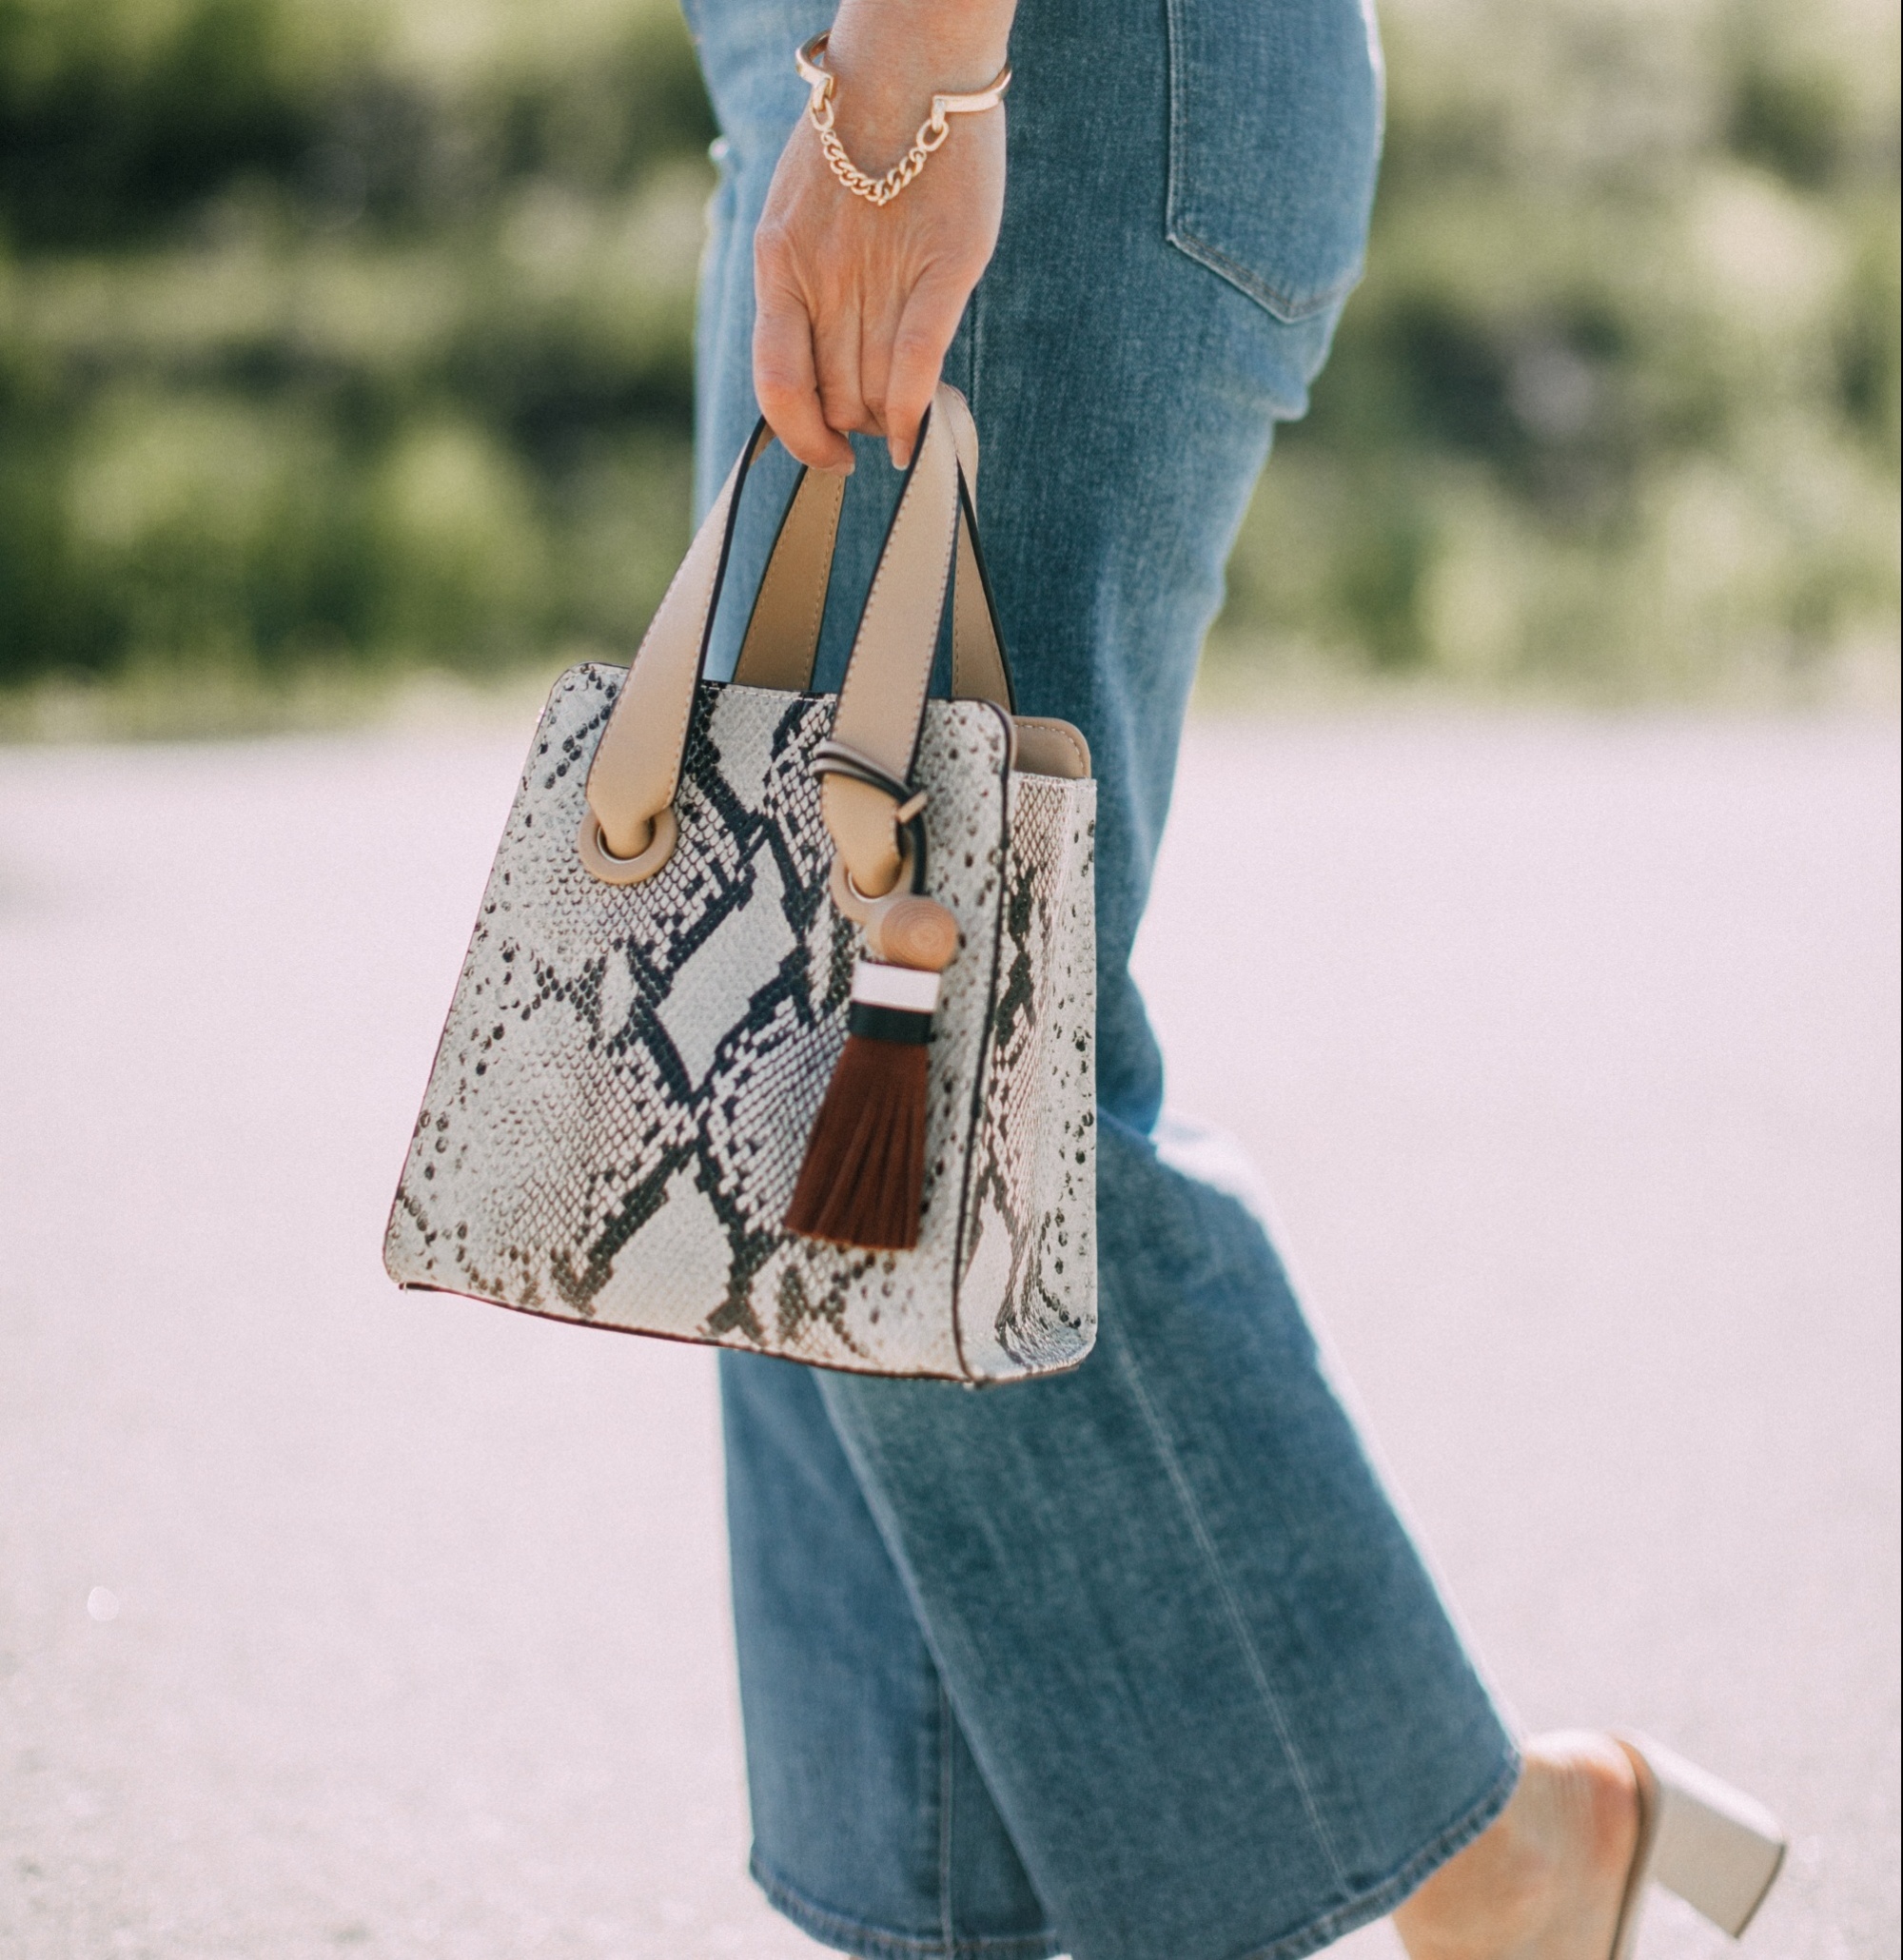 Lucite Trend, Fashion blogger Erin Busbee of BusbeeStyle.com wearing lucite mules from Vince Camuto with J Brand jeans, white Leith top, Hermes belt, and a python print Vince Camuto bag in Telluride, Colorado